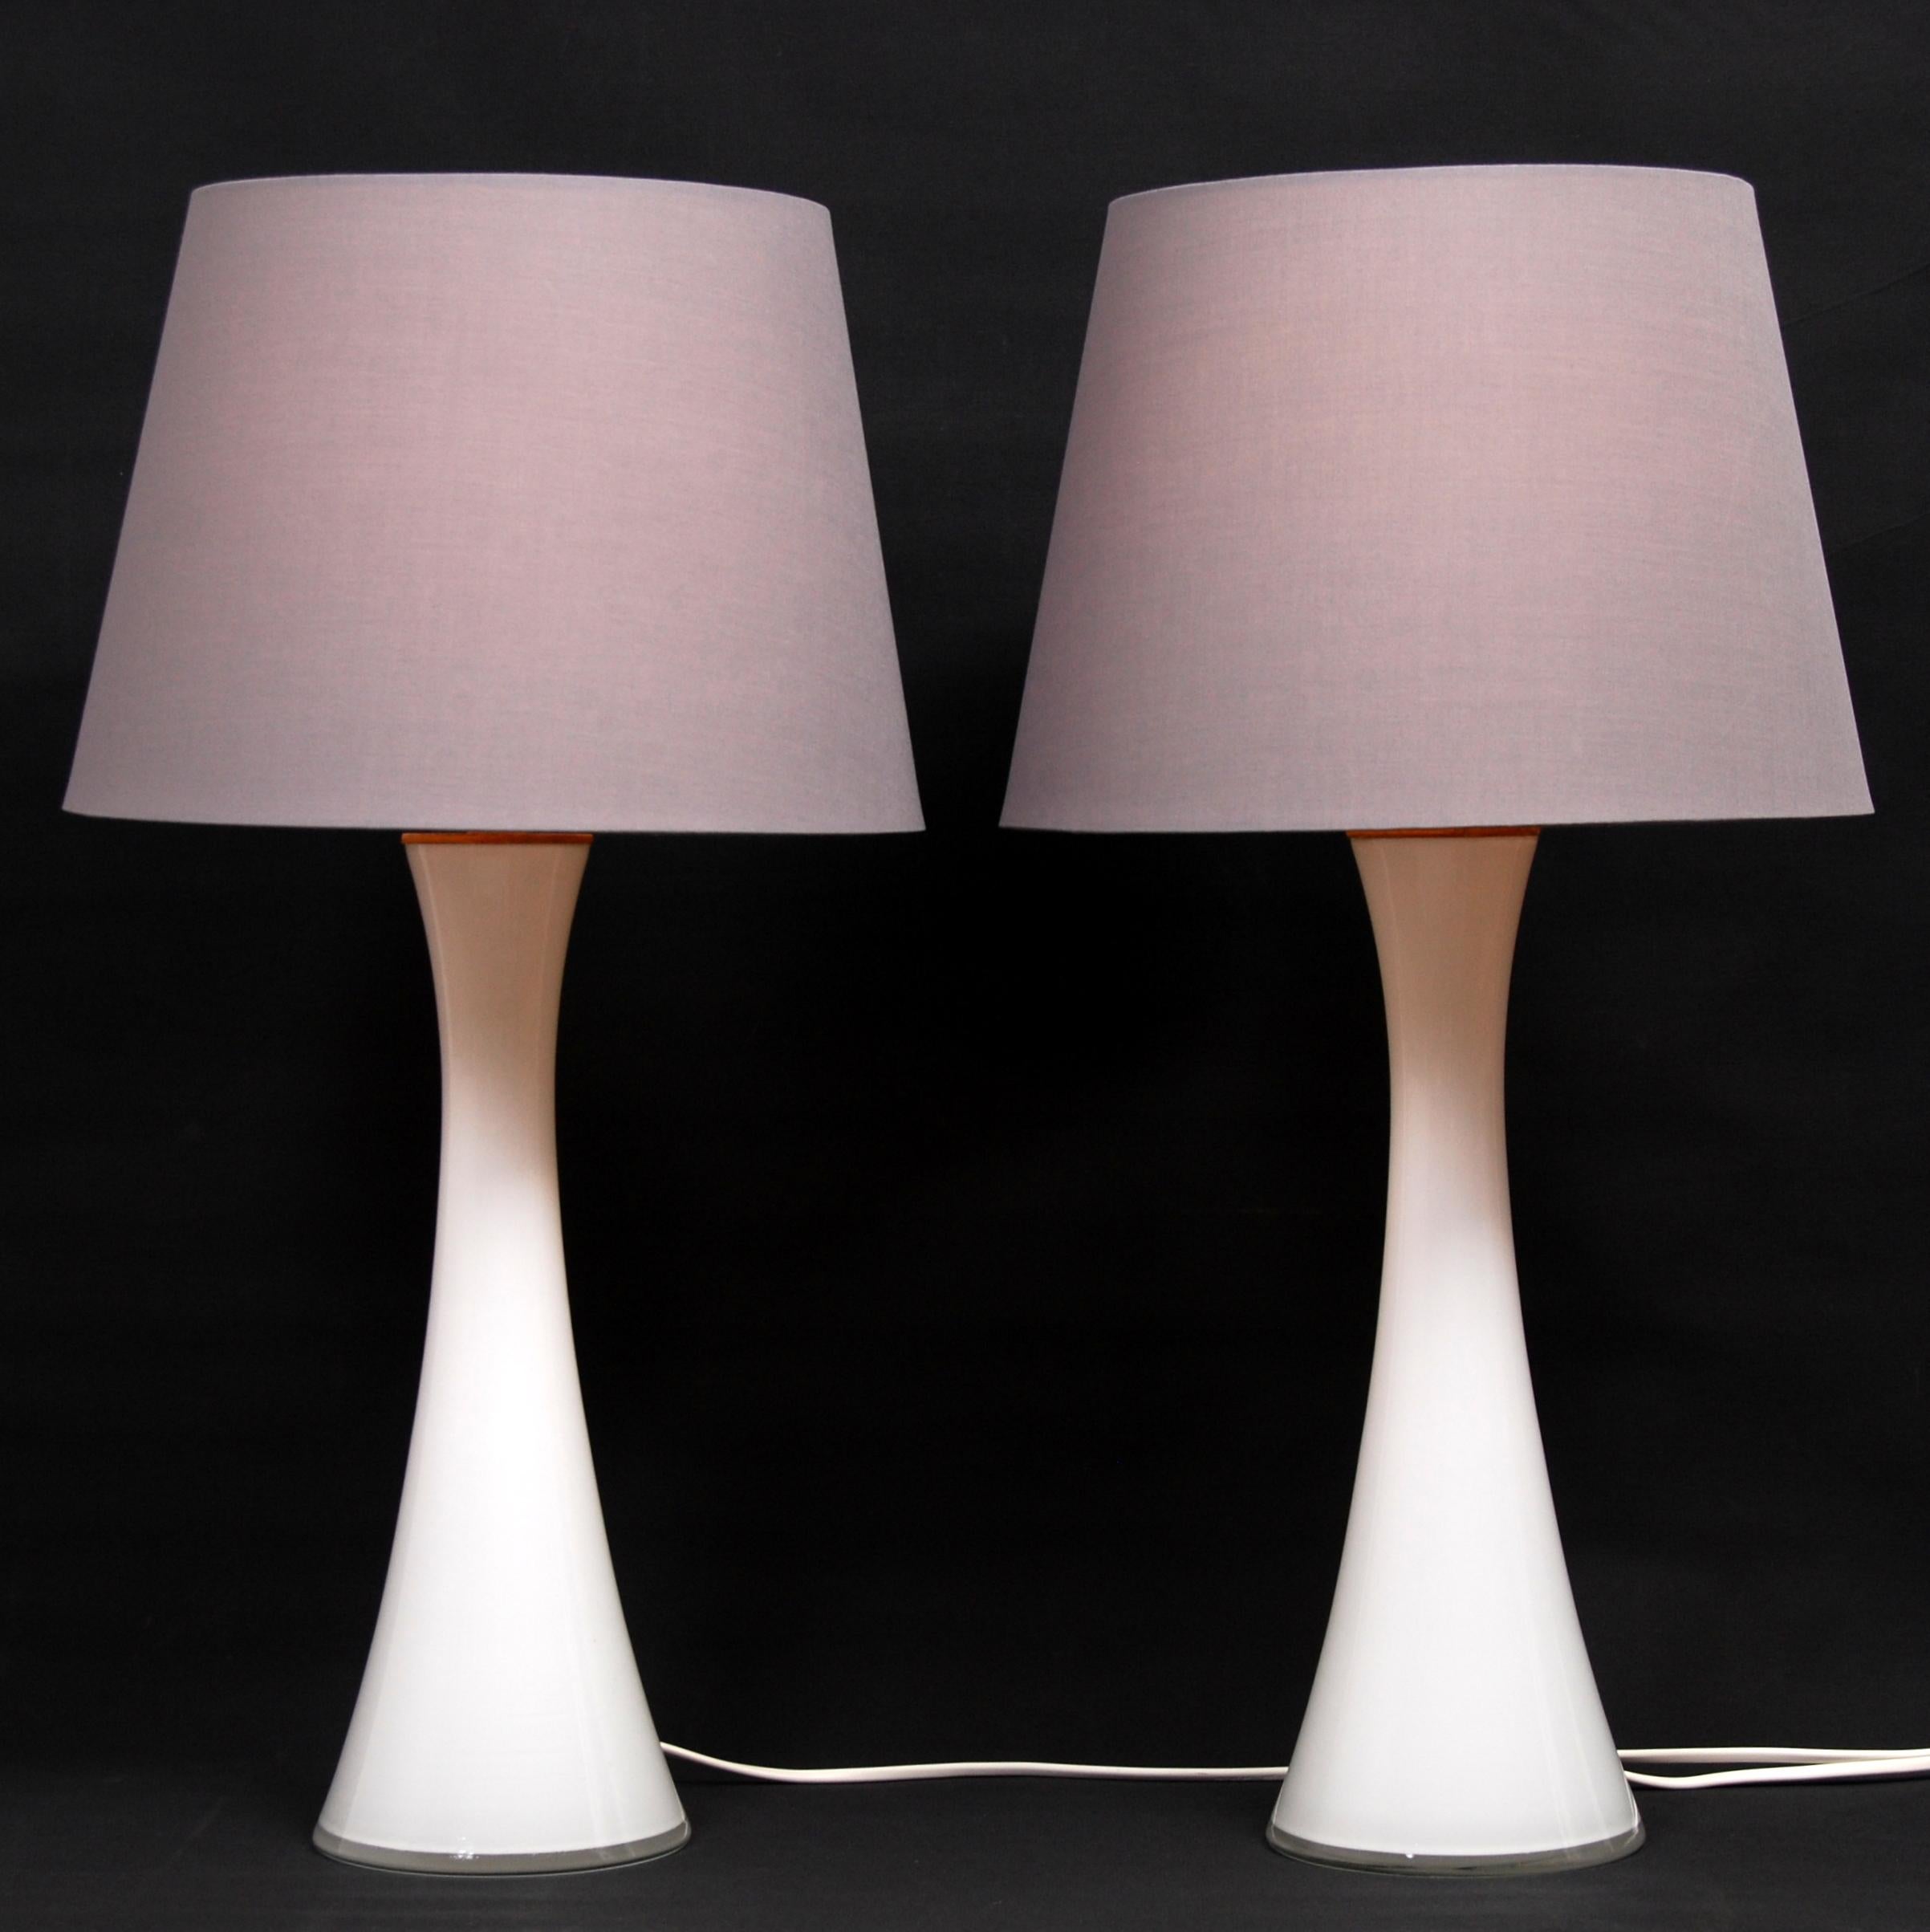 A pair of diabolo shaped Swedish opaline glass table lamps with teak fittings. Designed by Berndt Nordstedt for Bergboms. Newly Rewired. For sale without the two shades. The measurements and shipping costs stated are of the lamps without the shades.